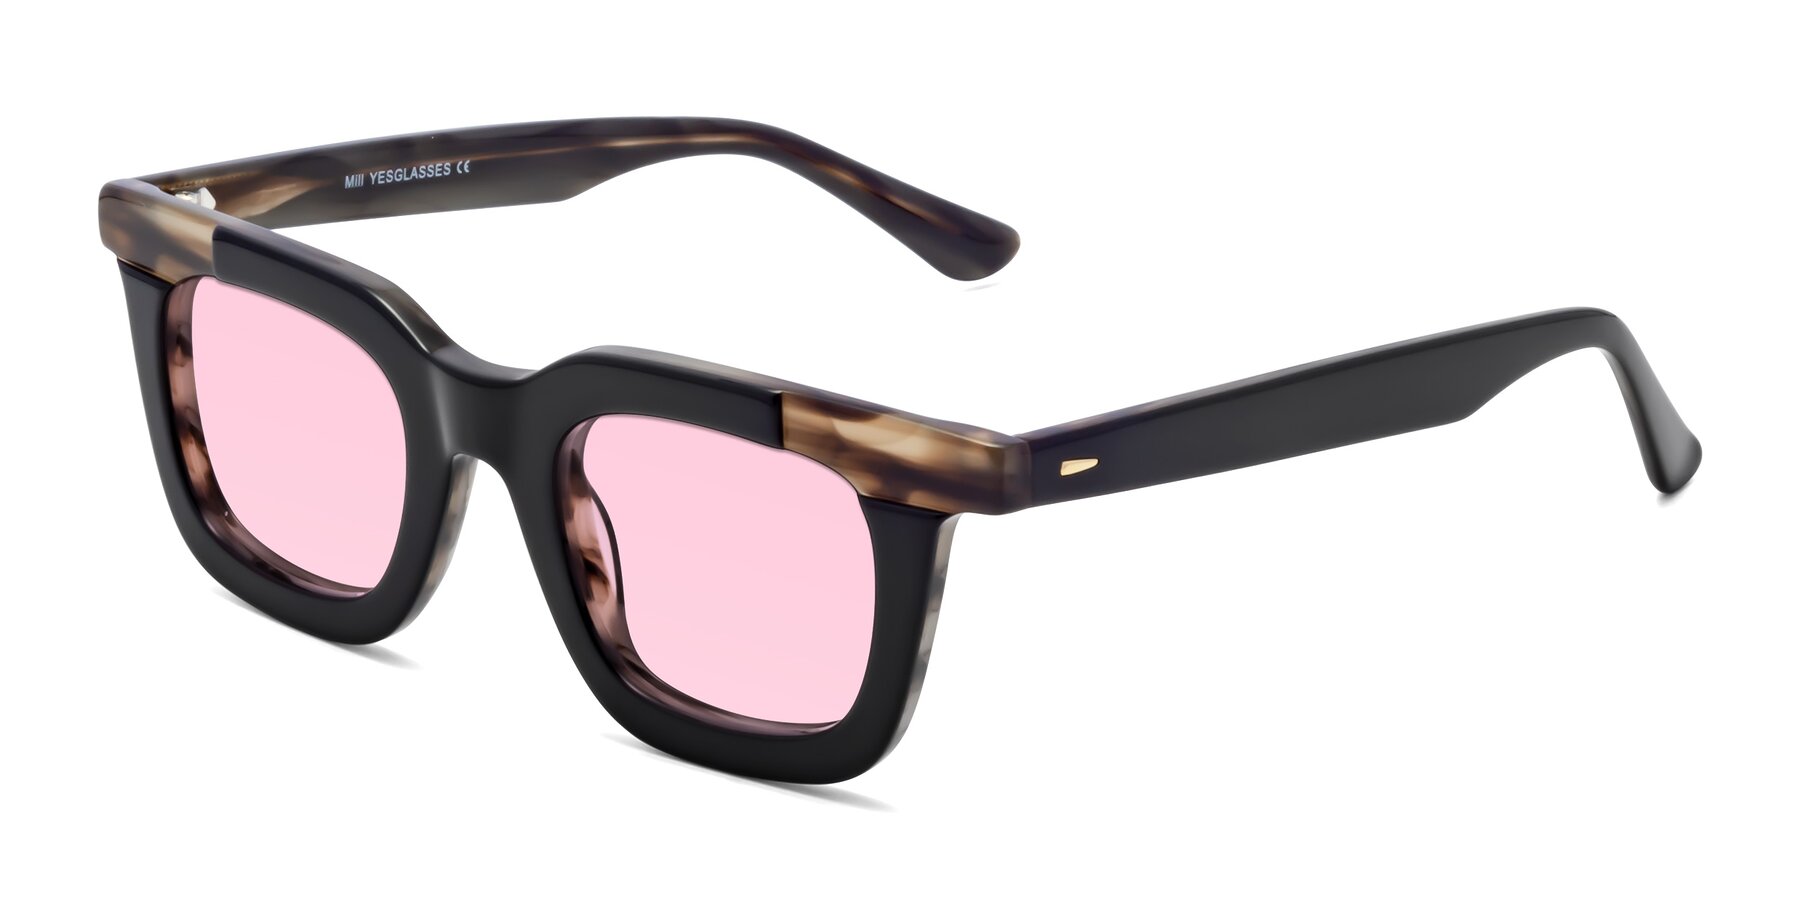 Angle of Mill in Black-Brown with Light Pink Tinted Lenses